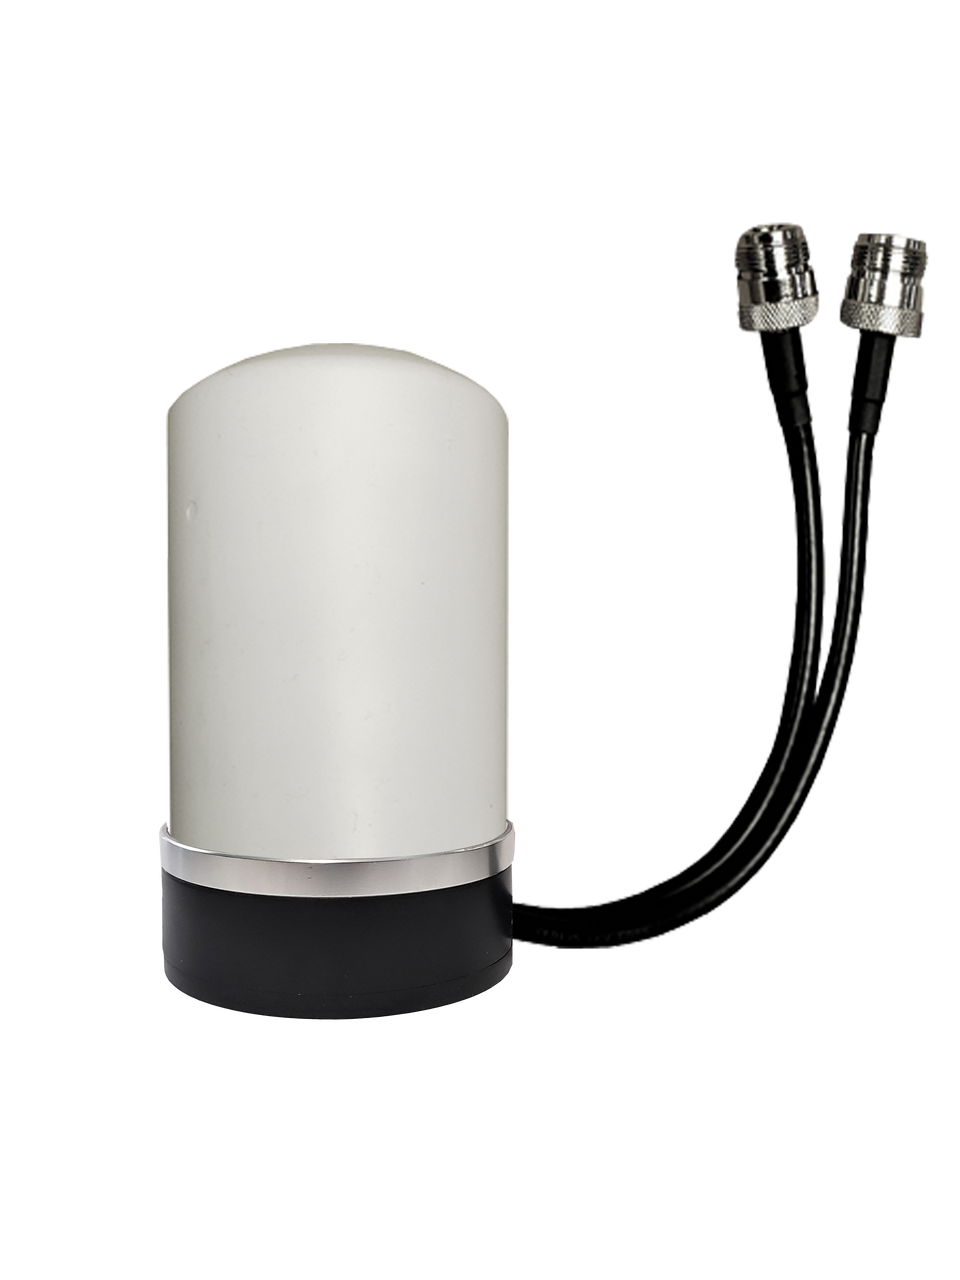 Peplink Transit-DUO - M17M Omni Directional MIMO Cellular 4G 5G LTE AWS XLTE M2M IoT Antenna - Magnetic Base w/1FT N-Female Coax Cables. w/ Cable Length Options